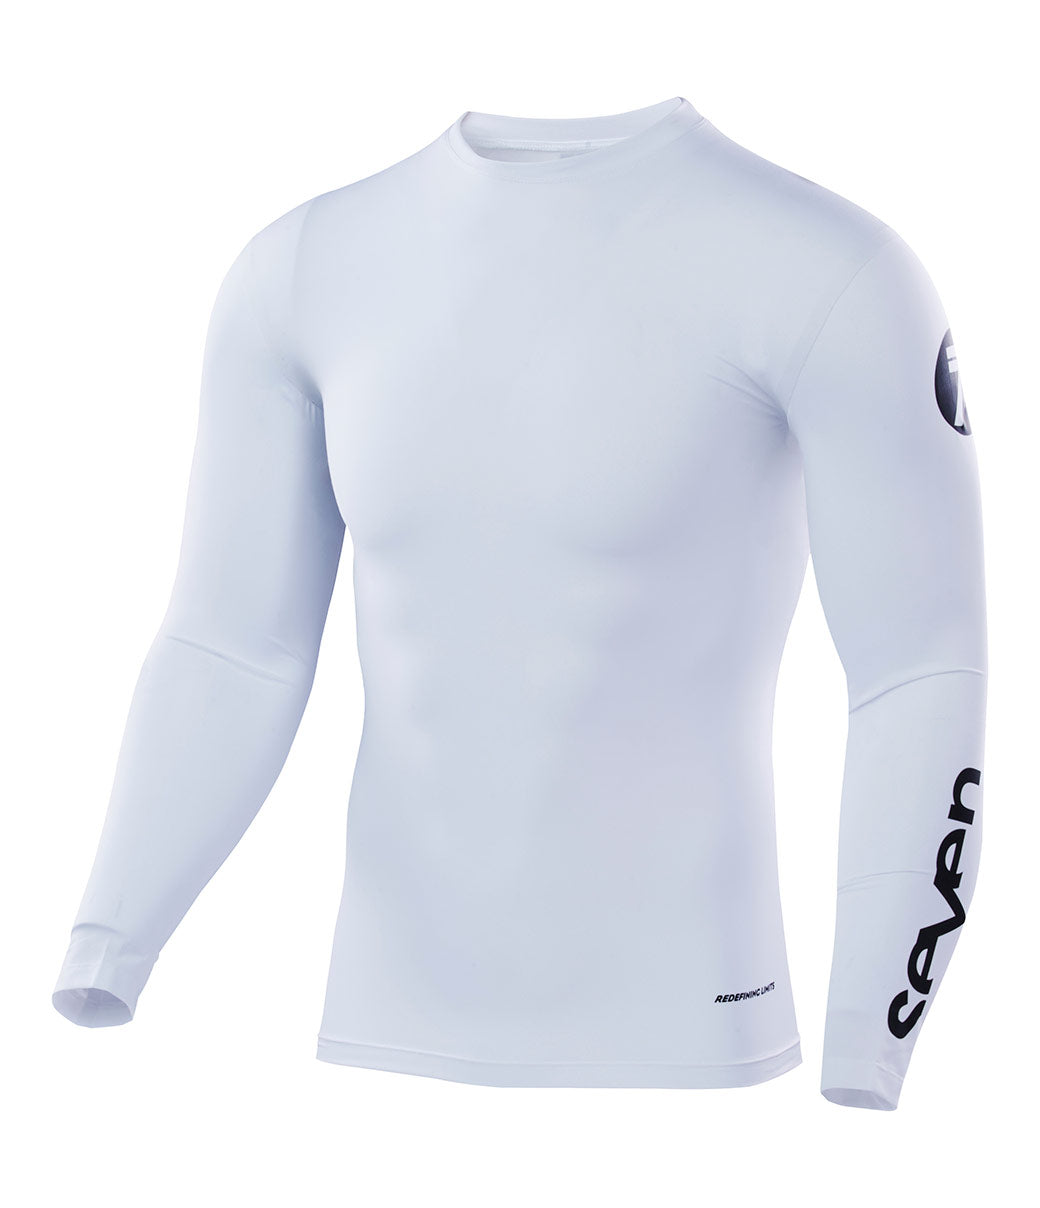 Review: Spun Performance Long Sleeved Compression Shirt